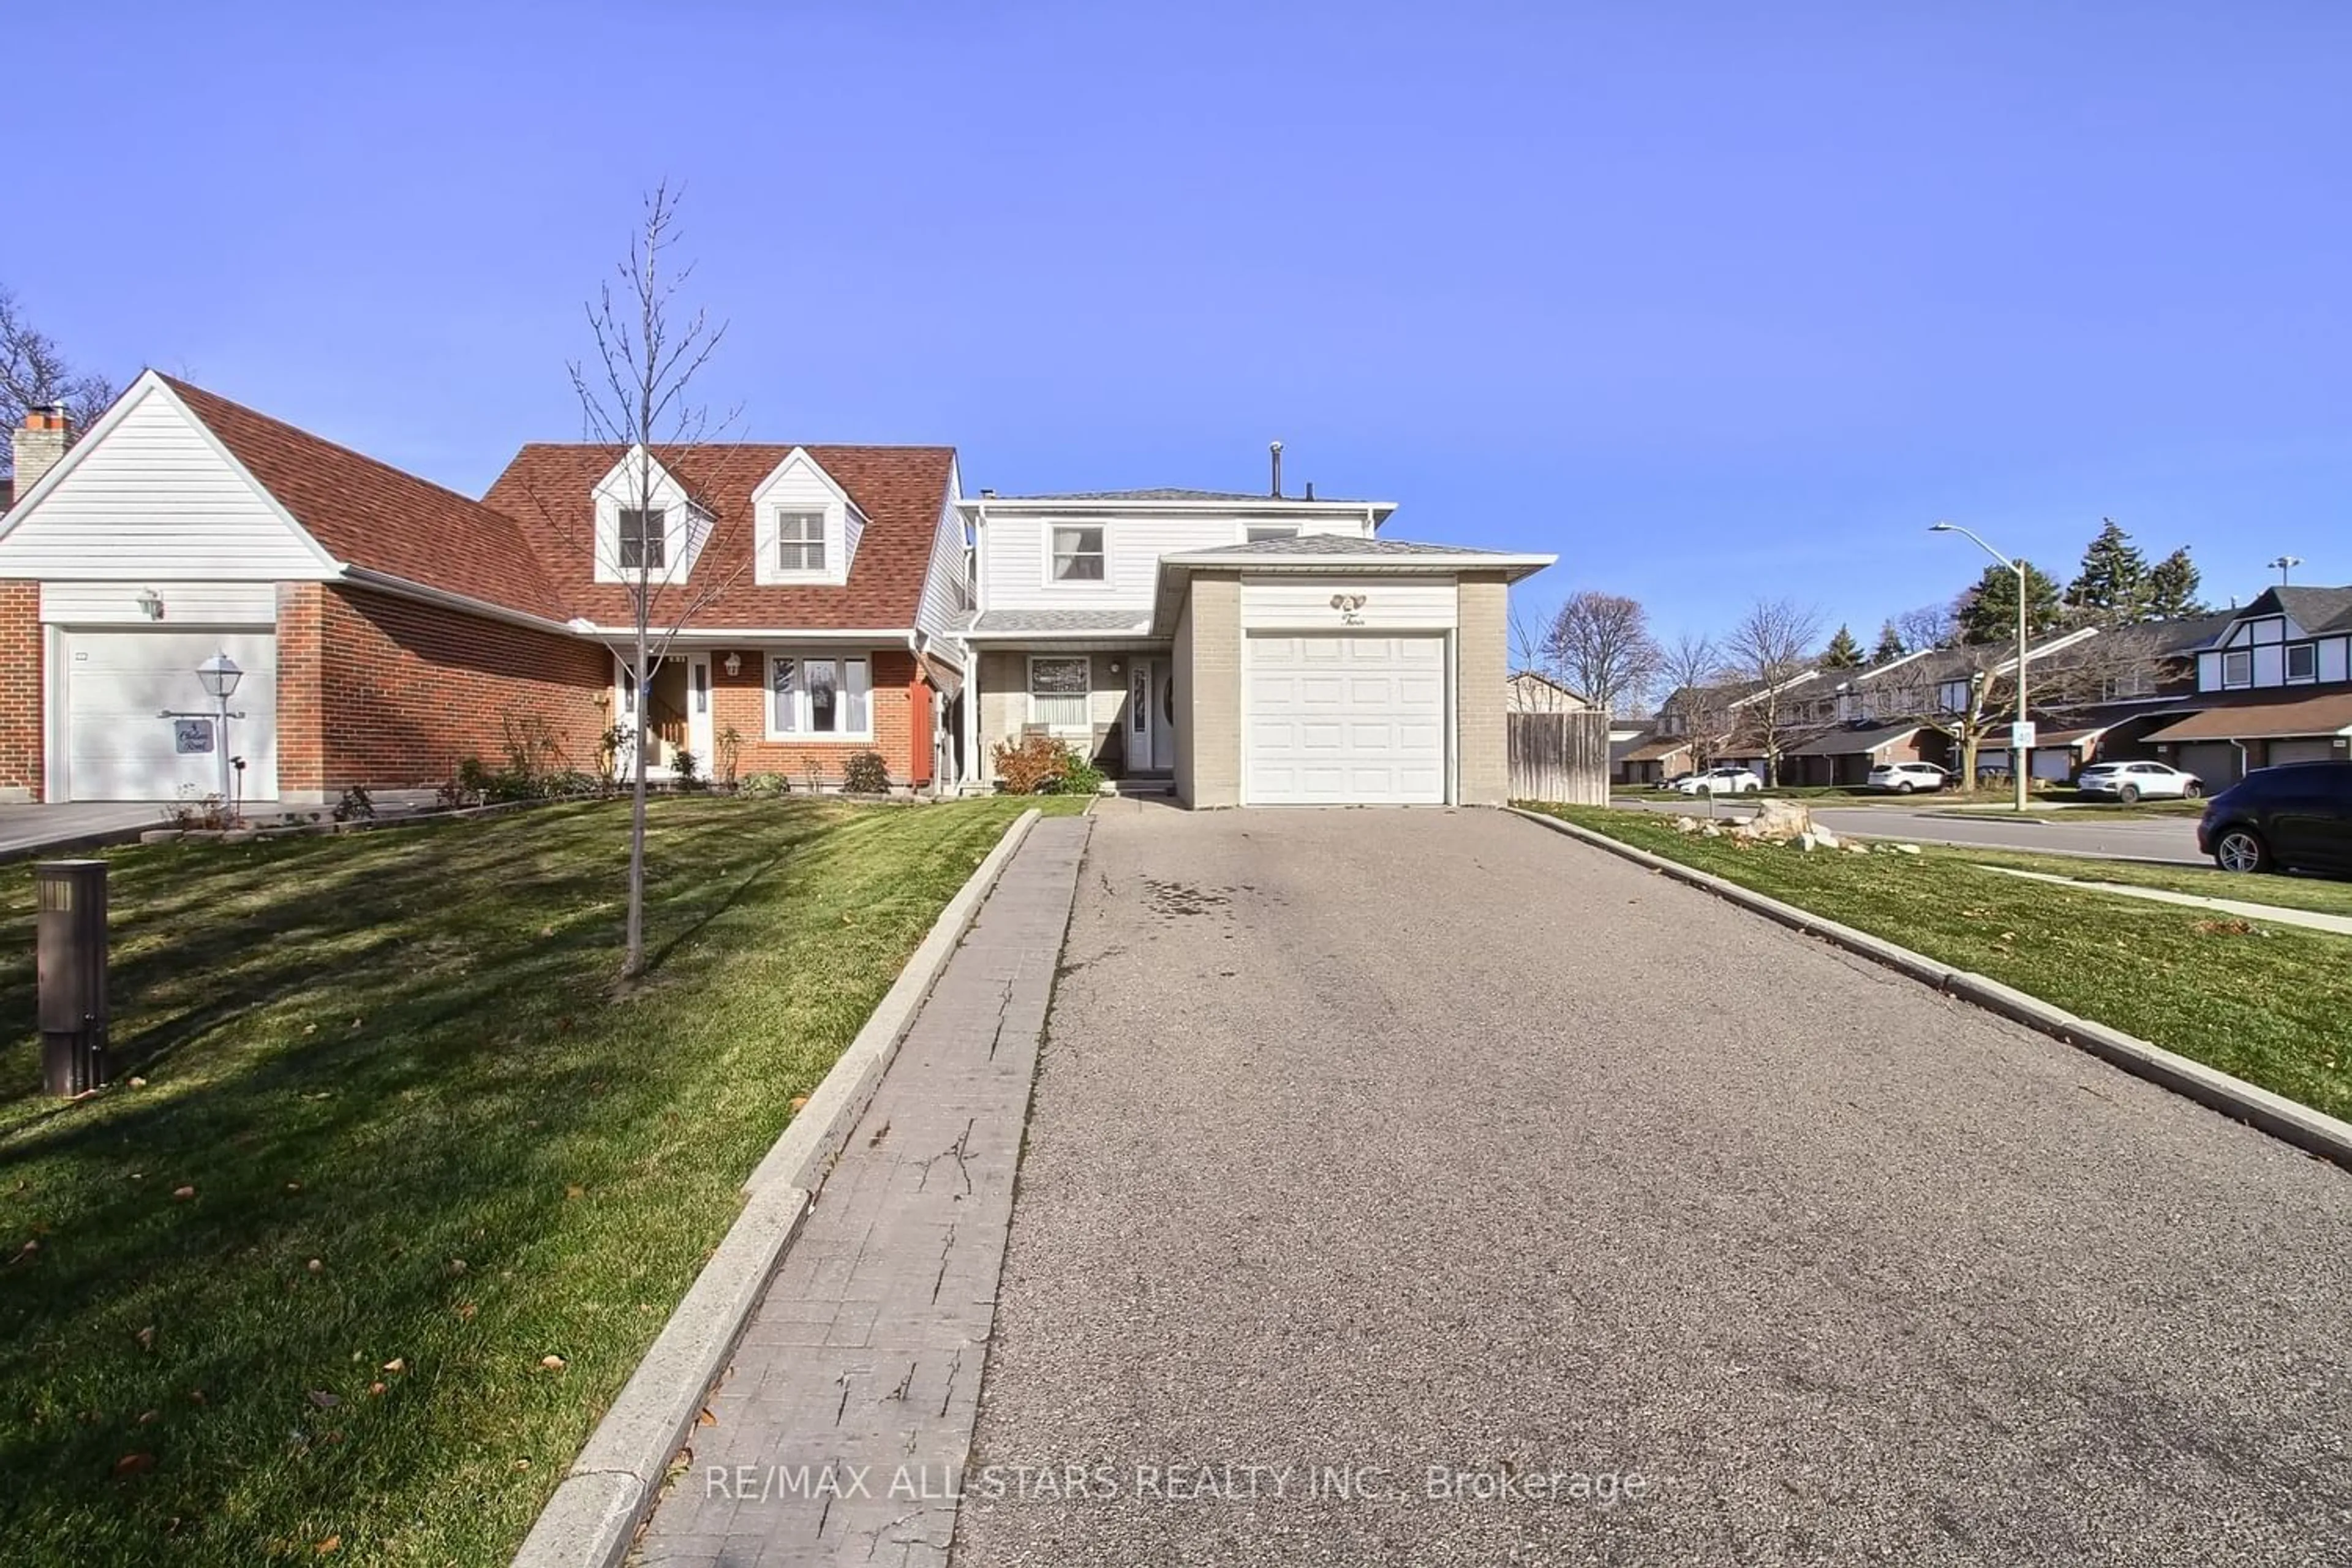 Street view for 2 Chelsea Rd, Markham Ontario L3T 4H1